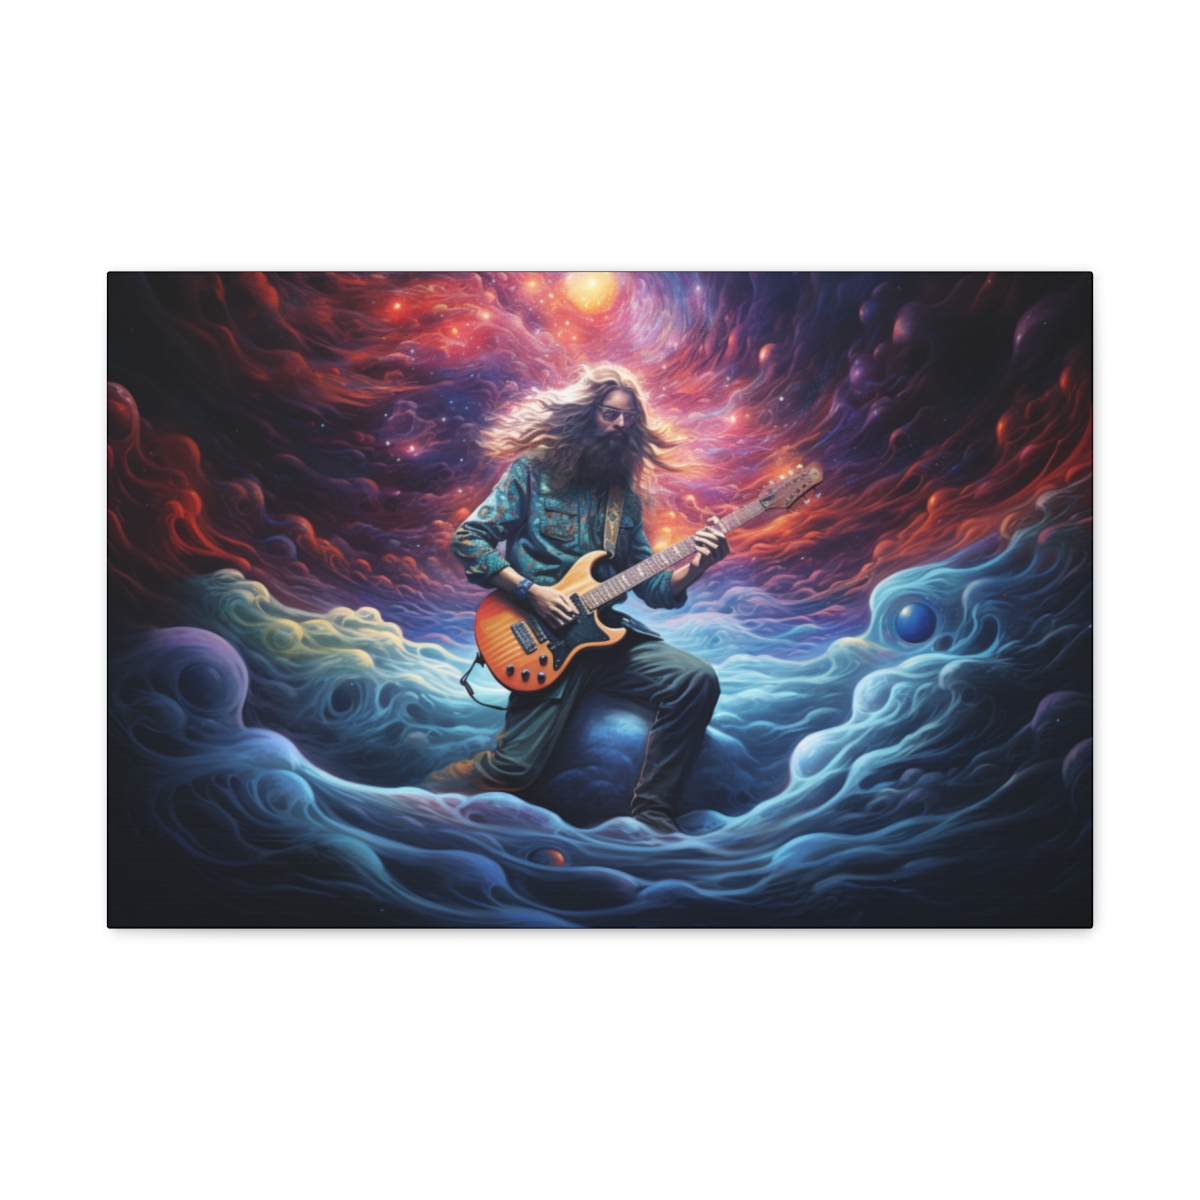 Hippie Psychedelic Art Canvas Print: Explosion Of Ideas